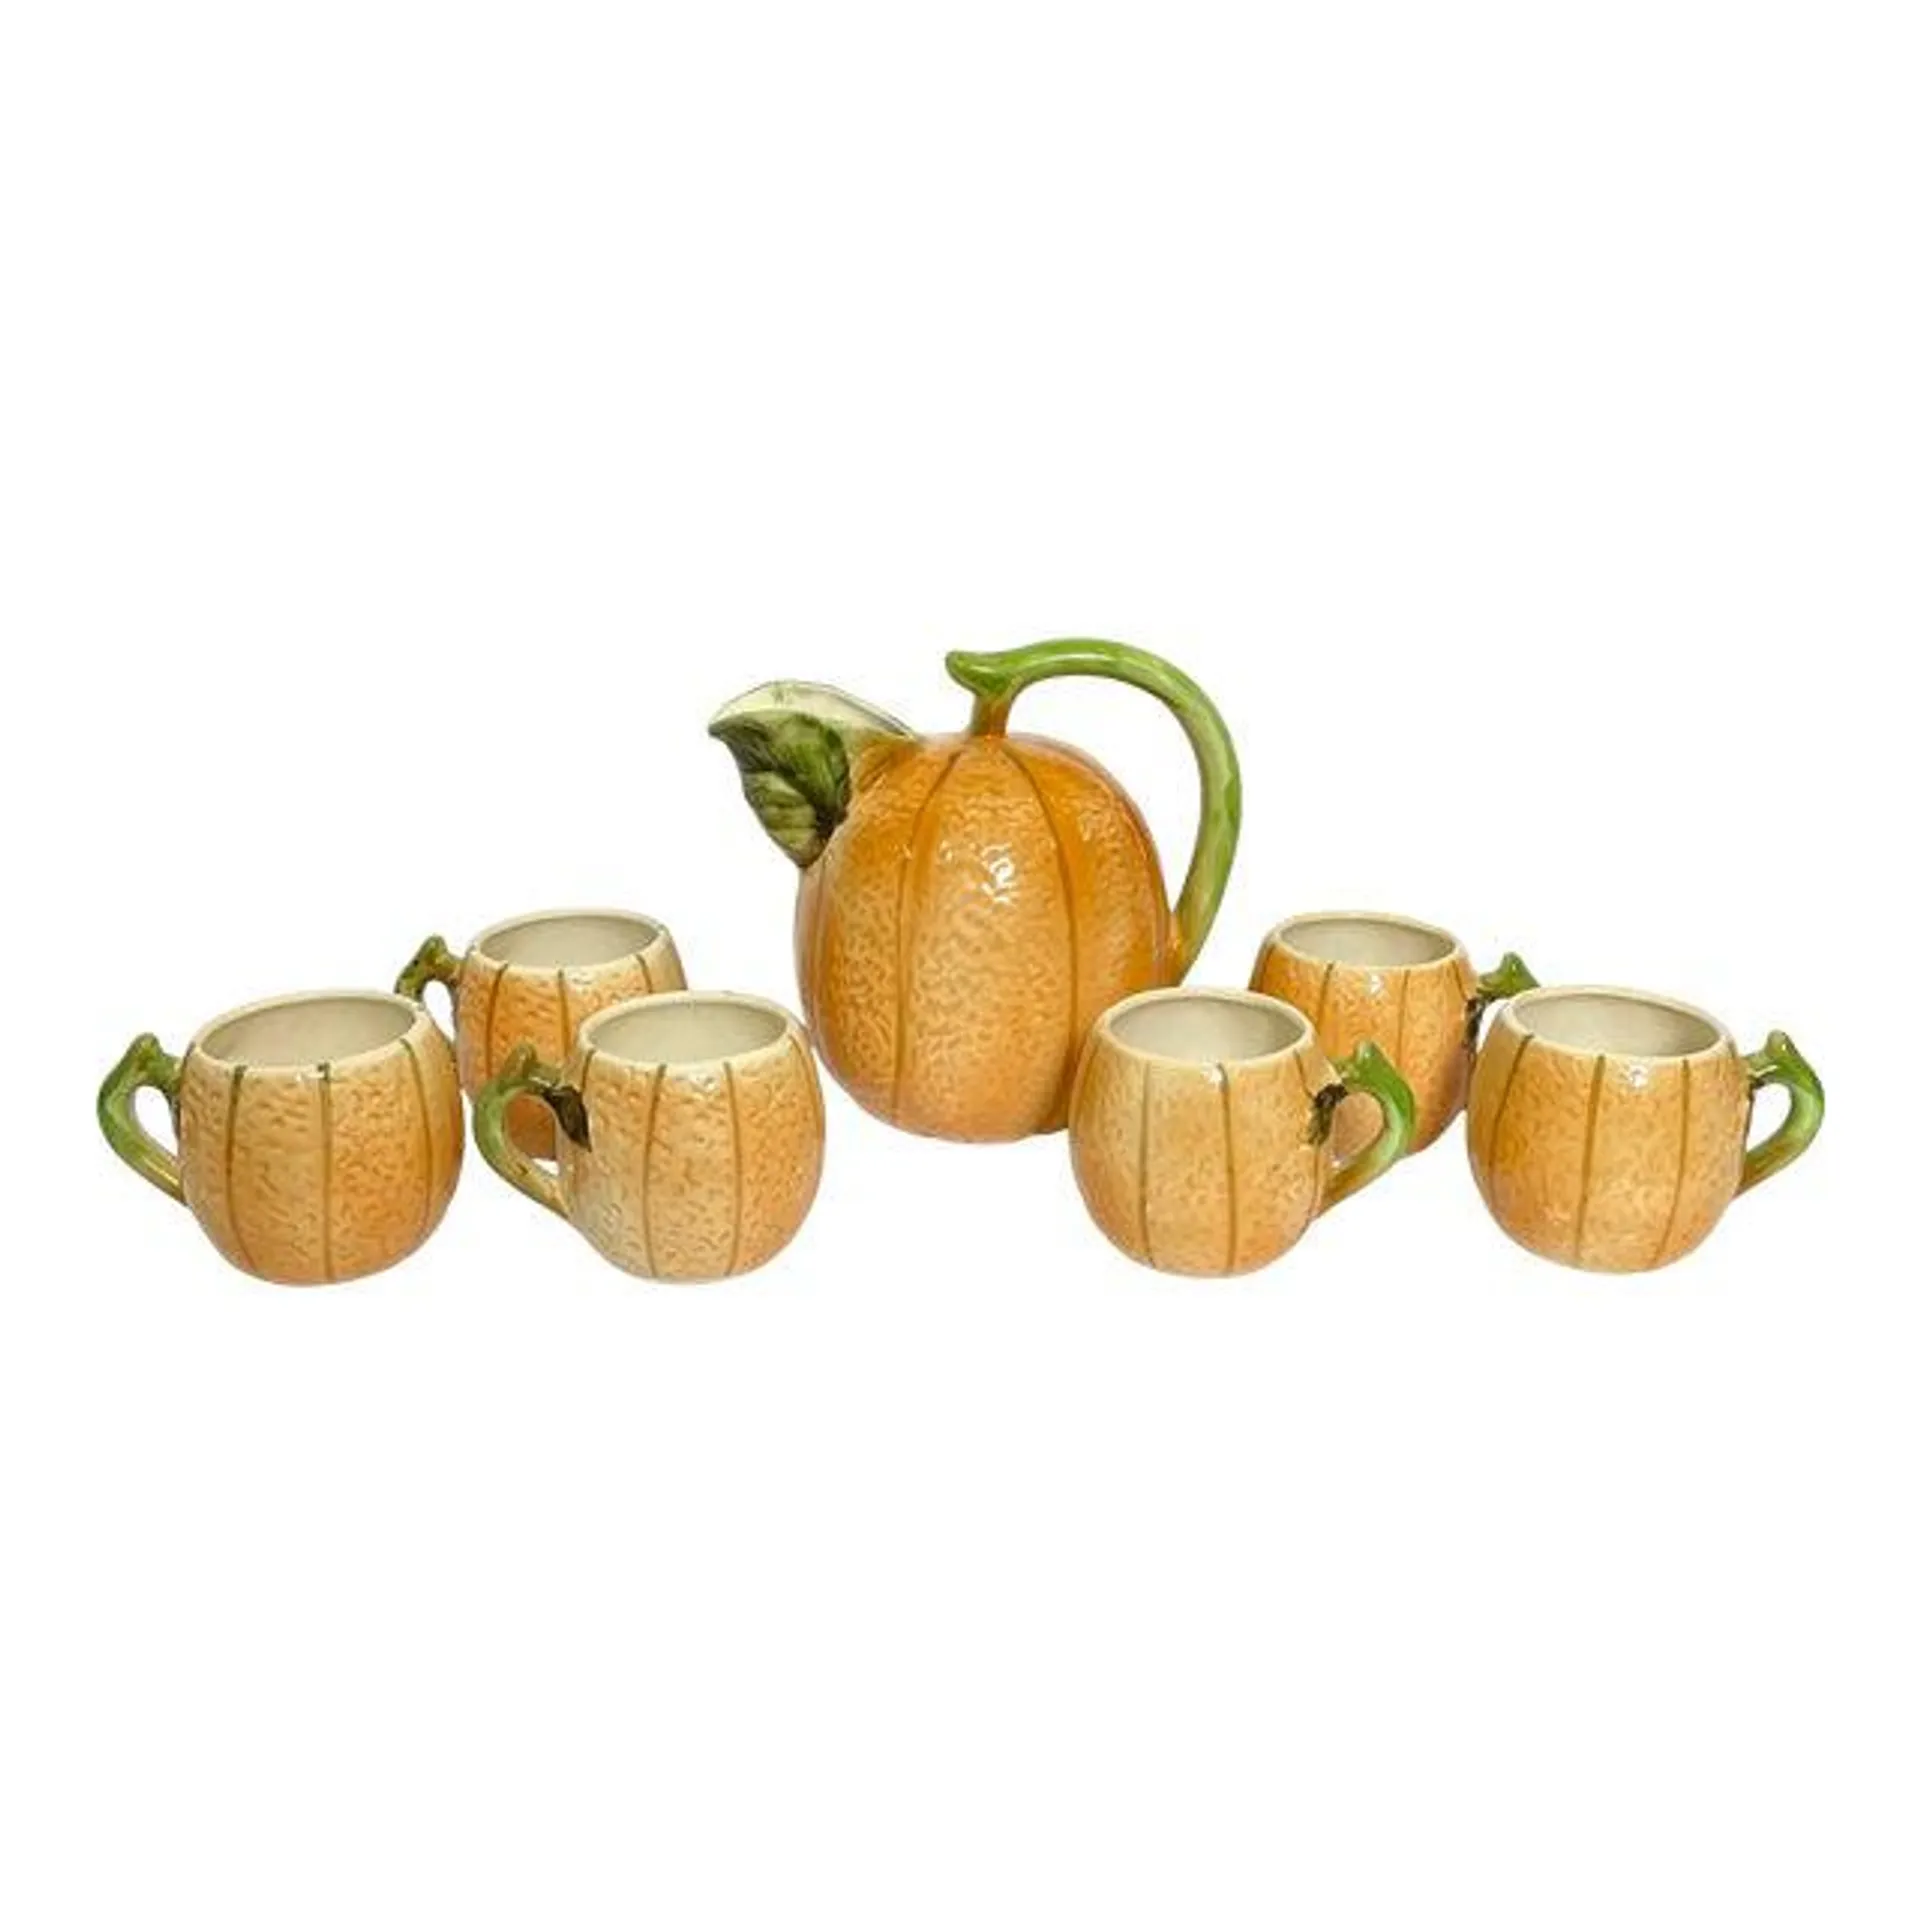 The Haldon Group Ceramic Cantelope Pitcher and 6 Cups